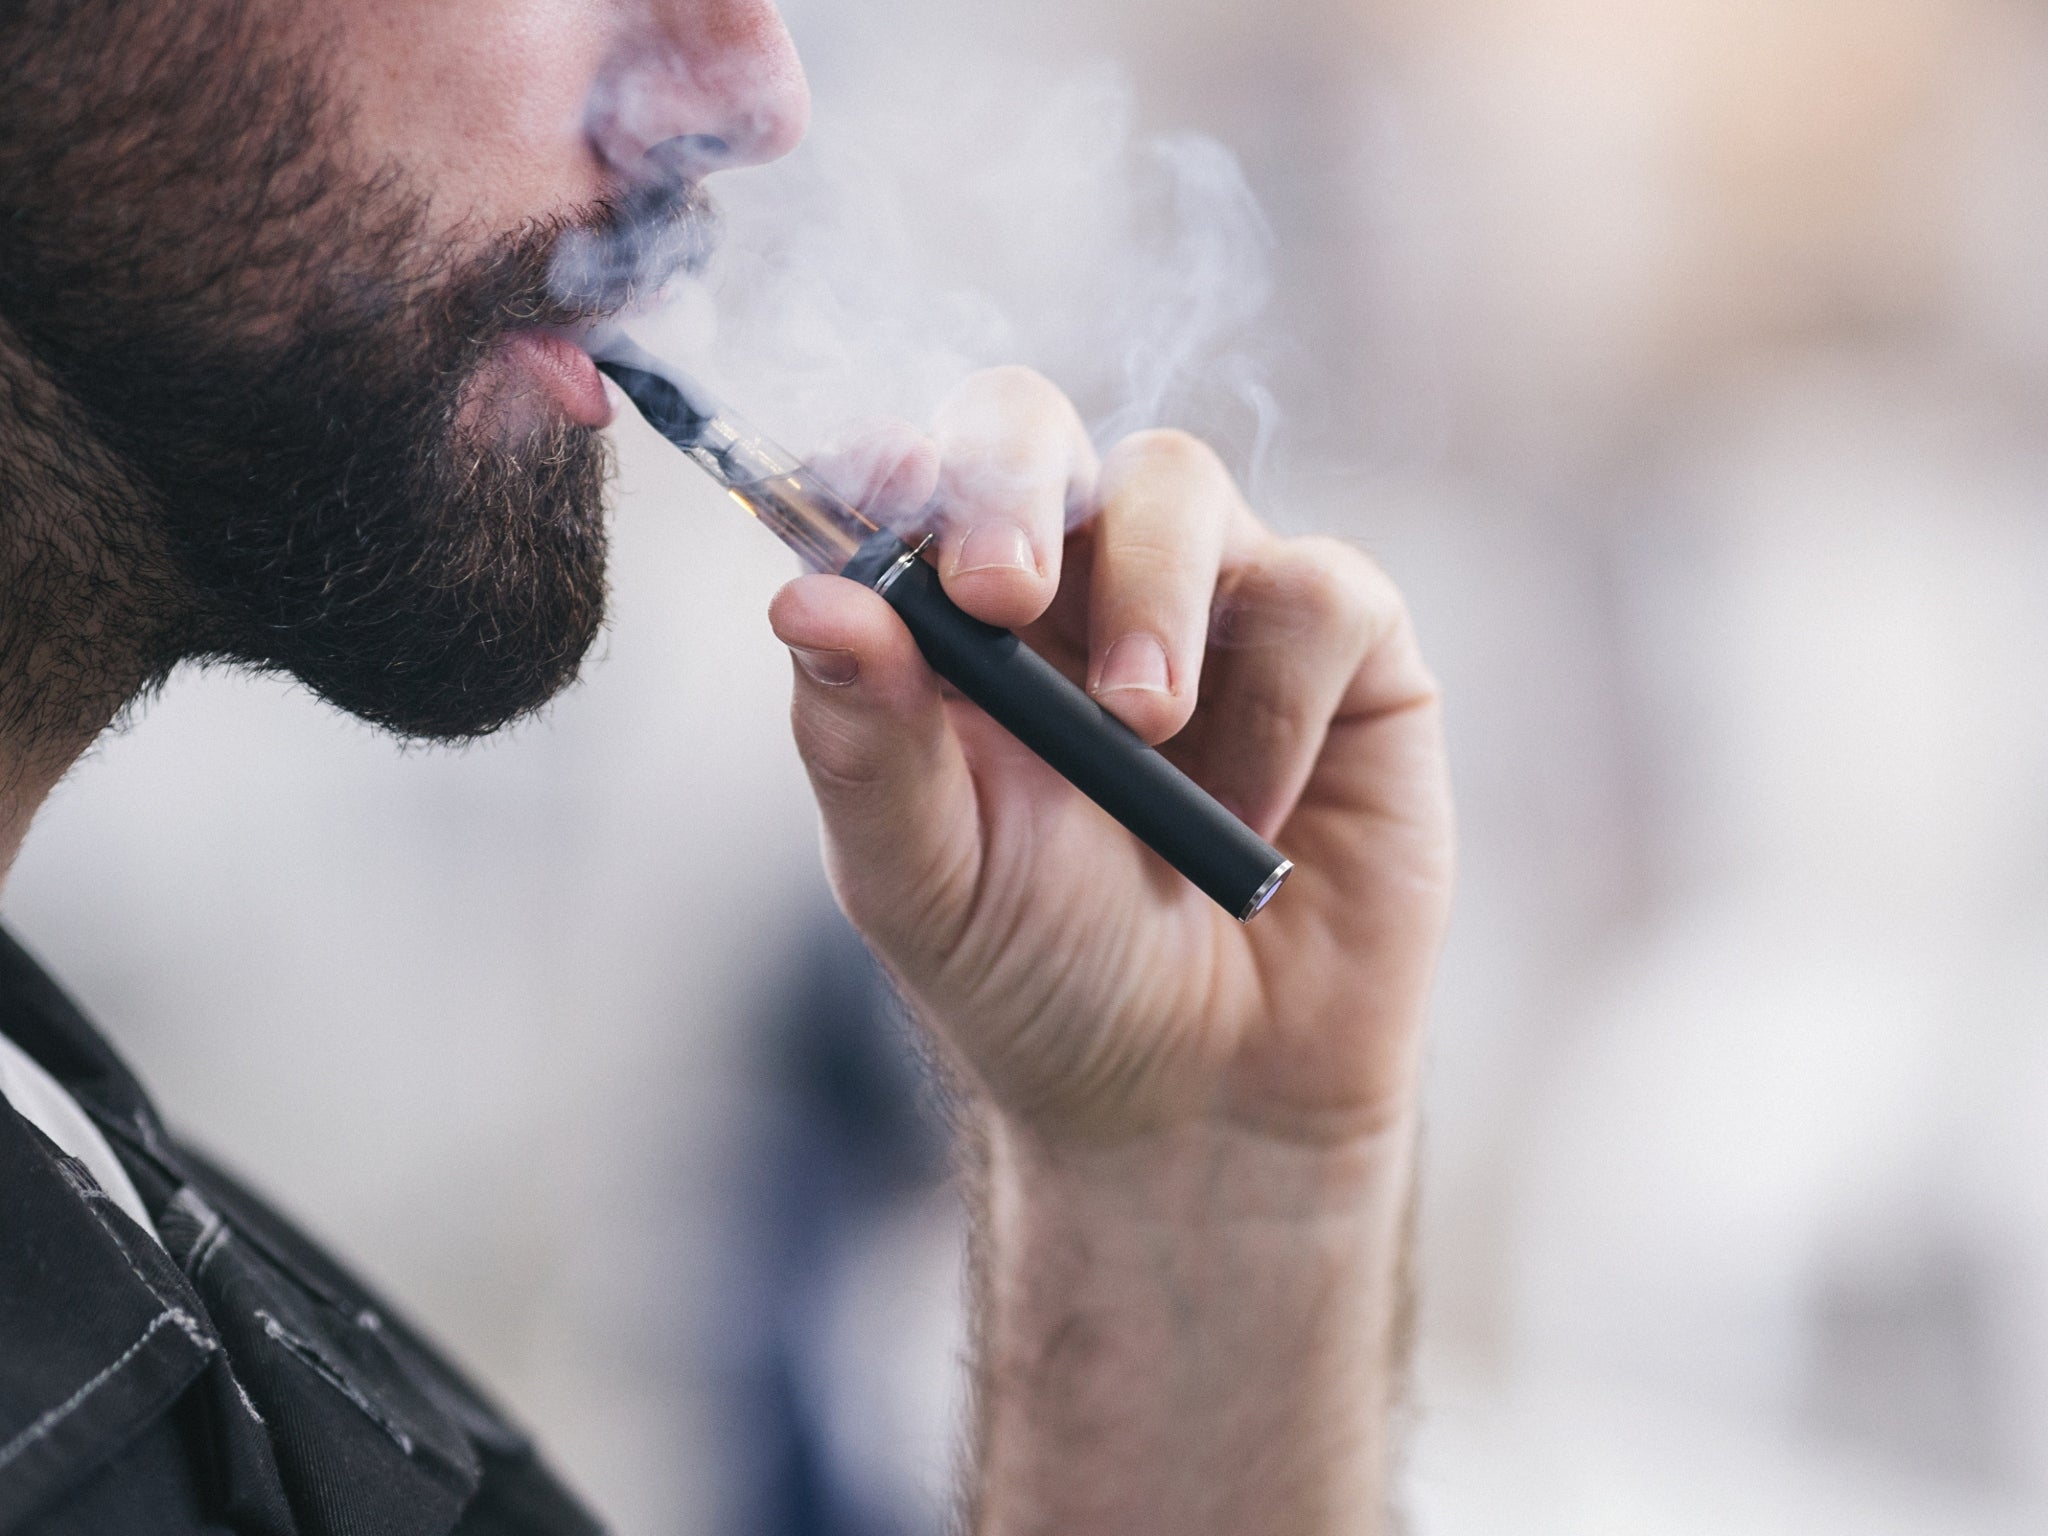 Vaping has been linked to erectile dysfunction in new study